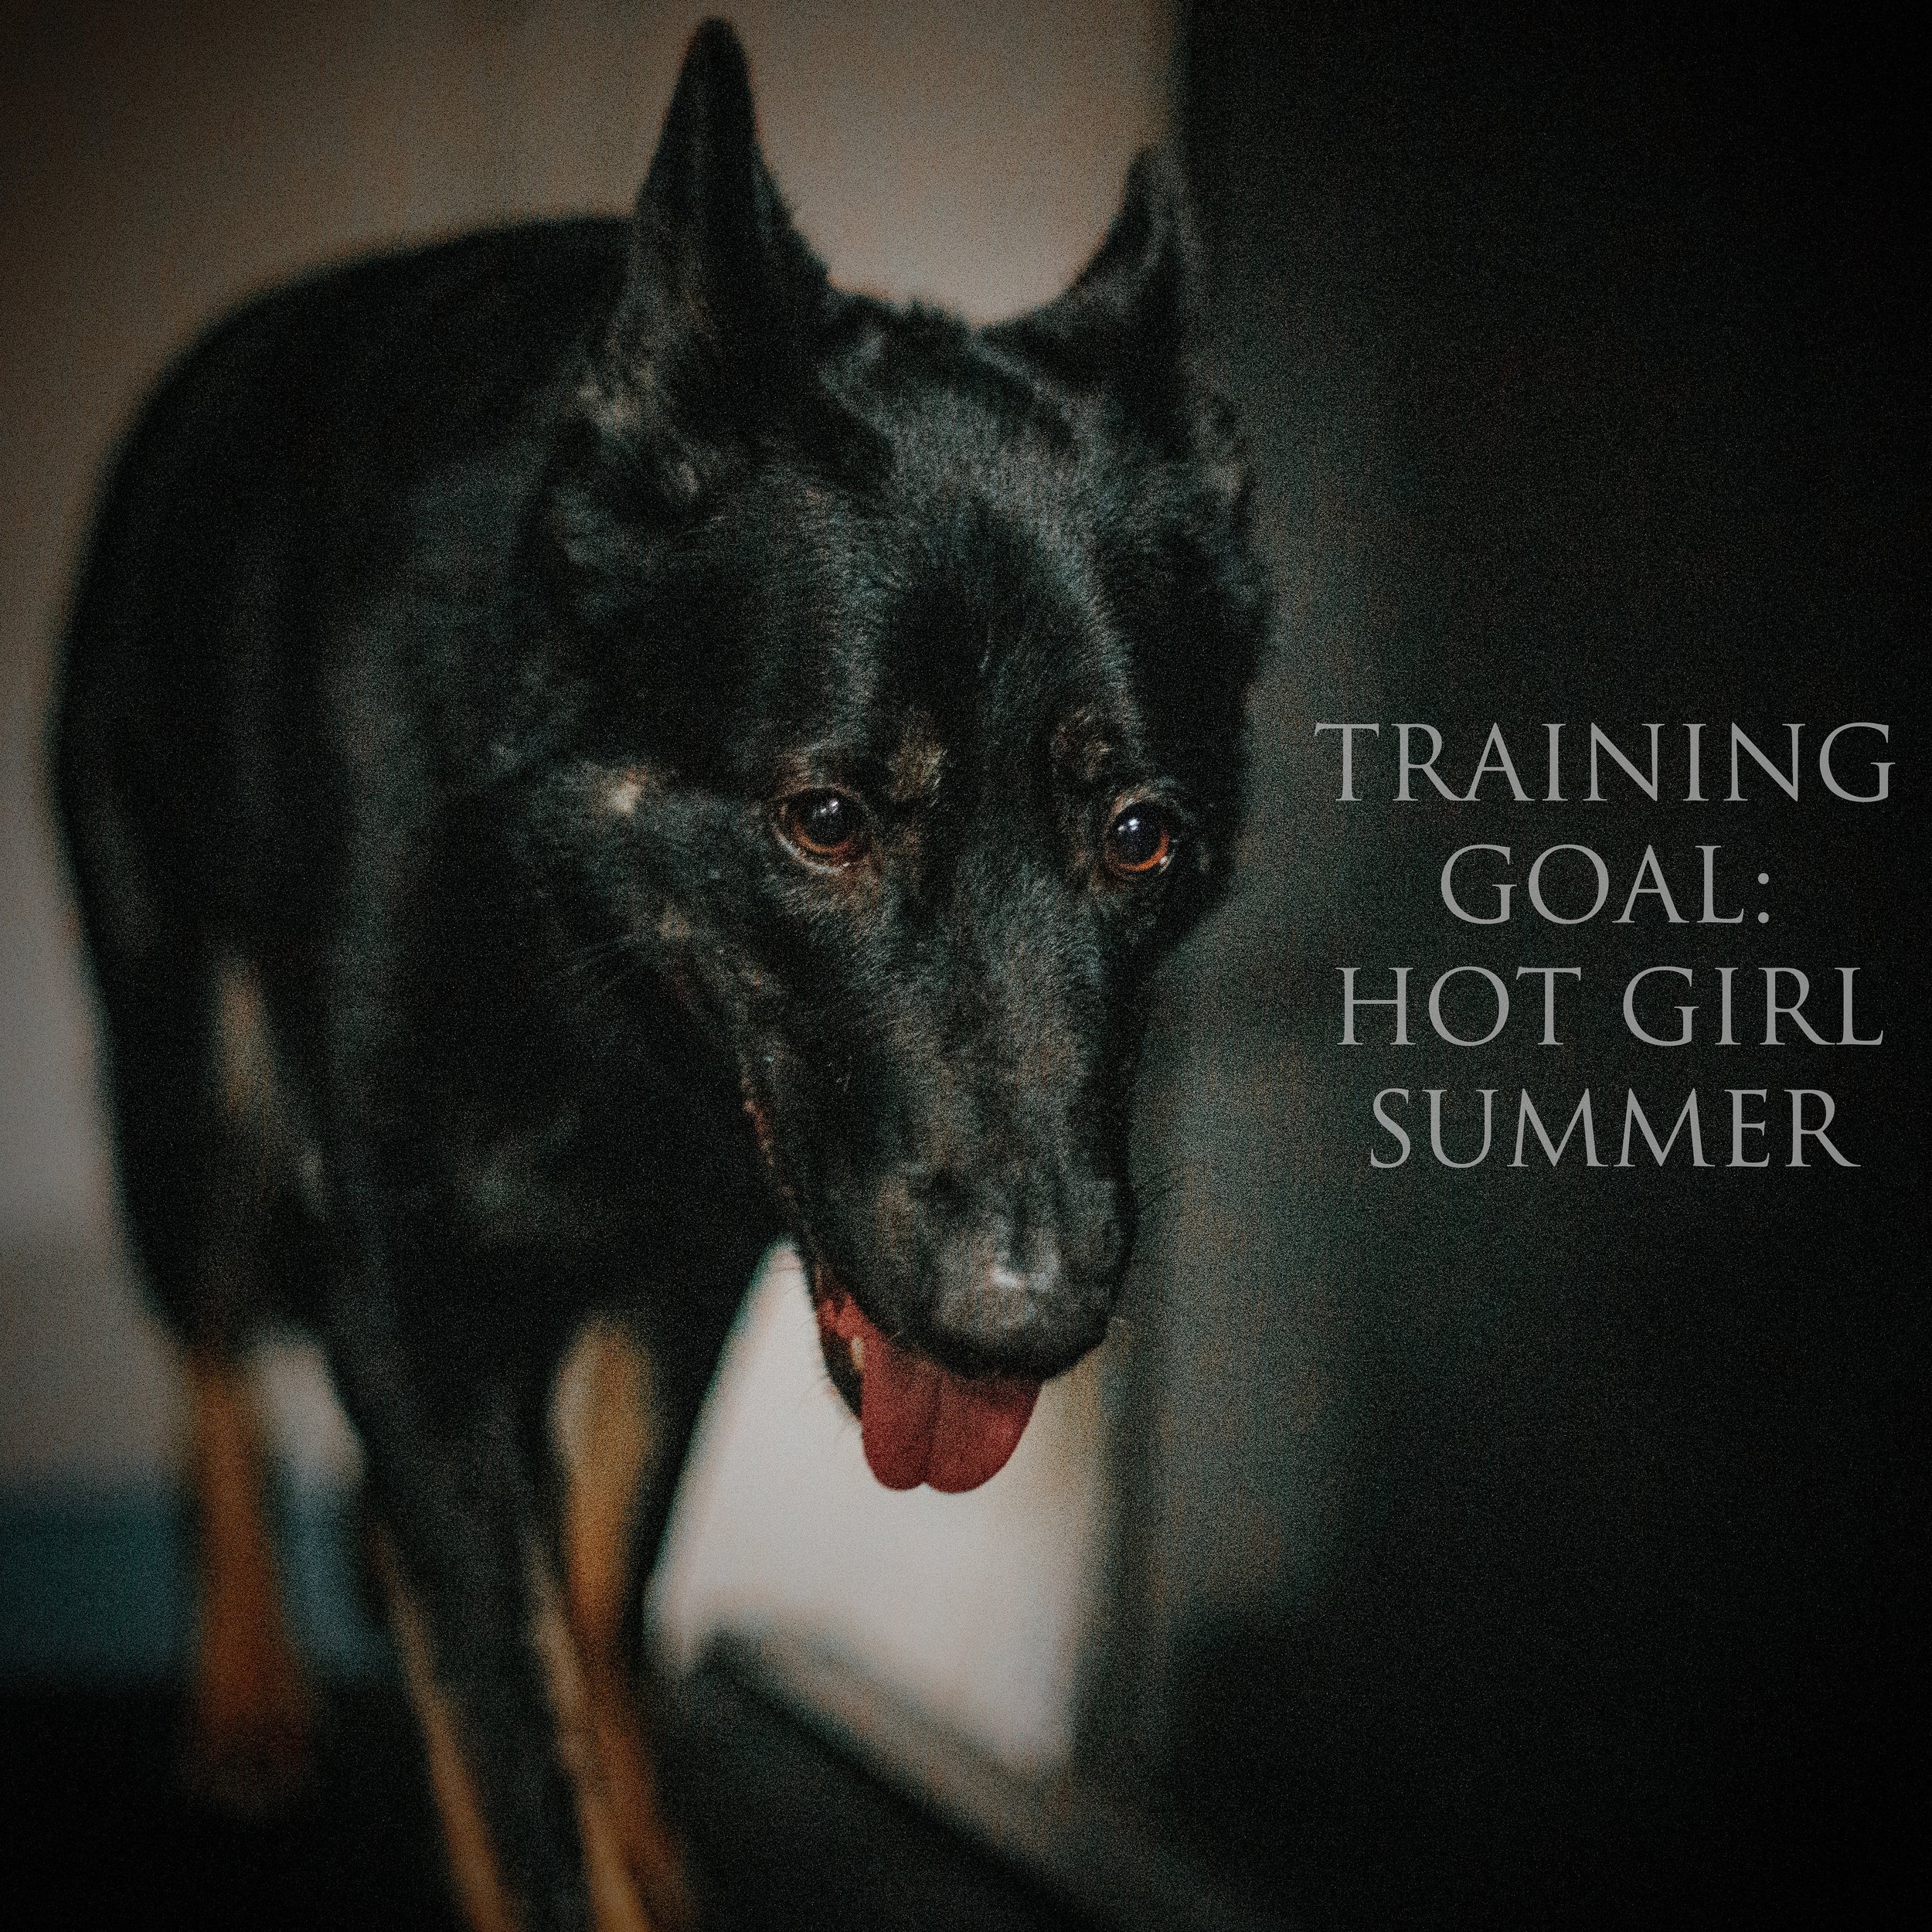 Kota gets regular cardio exercise that also works to steady her mentally before we head out to some activities. Lately I've been thinking through getting her back to reoccurring group classes. What are working on with your dogs?

#kotaops